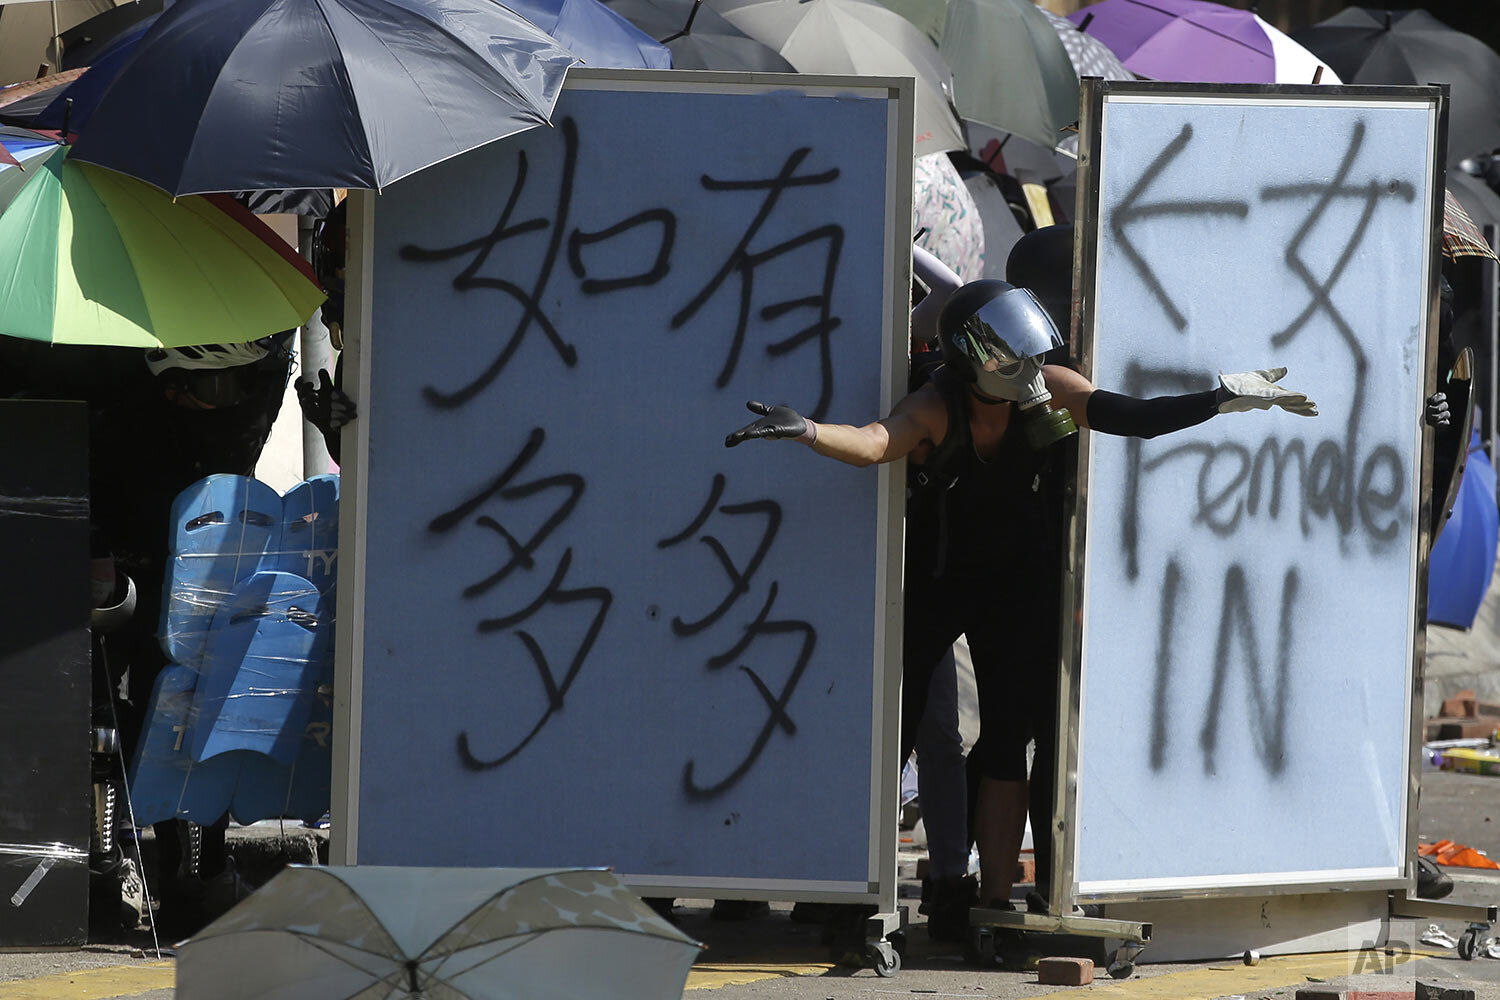  A protestor gestures from behind barricades during a confrontation with police at the Hong Kong Polytechnic University in Hong Kong, Sunday, Nov. 17, 2019. (AP Photo/Achmad Ibrahim) 